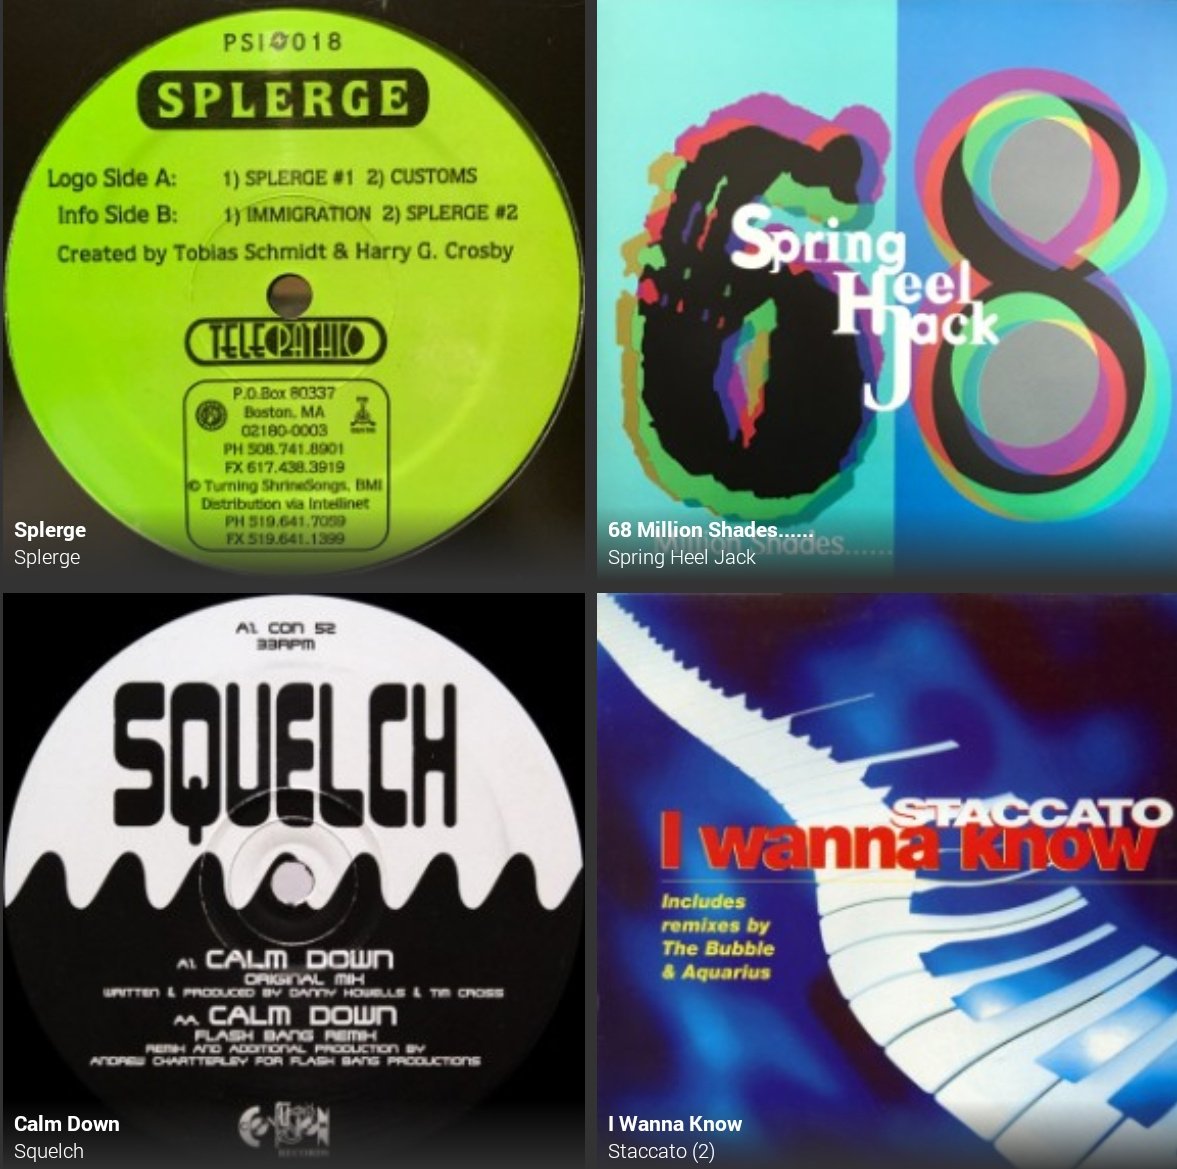 Today they're all from 1996 oddly! - Splerge (1996) Spring Heel Jack (1996) Squelch (1996) Staccato (1996) Techno, Drum N Bass, House, Progressive House #vinyl #vinylrecords #records #DrumNBass #dnb #techno #housemusic #progressiveHouse